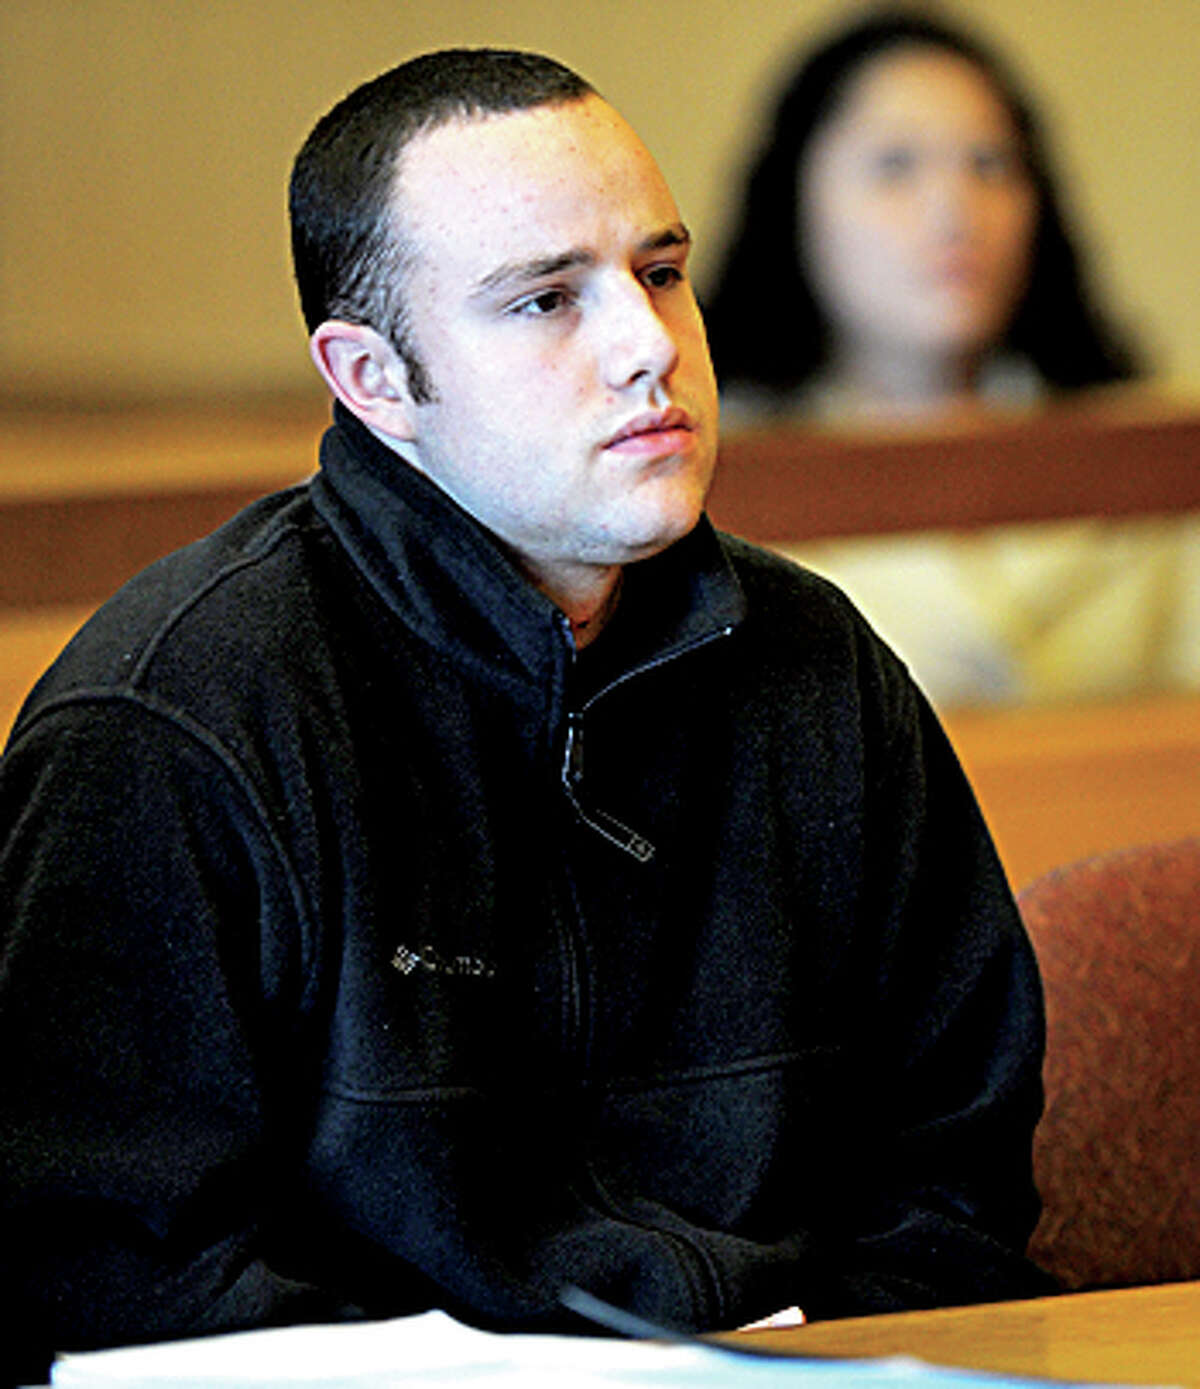 Aaron Ramsey of Wilton is found not guilty by reason of mental disease or deficiency by a three-judge panel during a verdict reading at state Superior Court in Stamford on Wednesday, December 12, 2012. Ramsey was on trial for beating his father, Edward, to death in May after Ramsey allegedly heard voices.